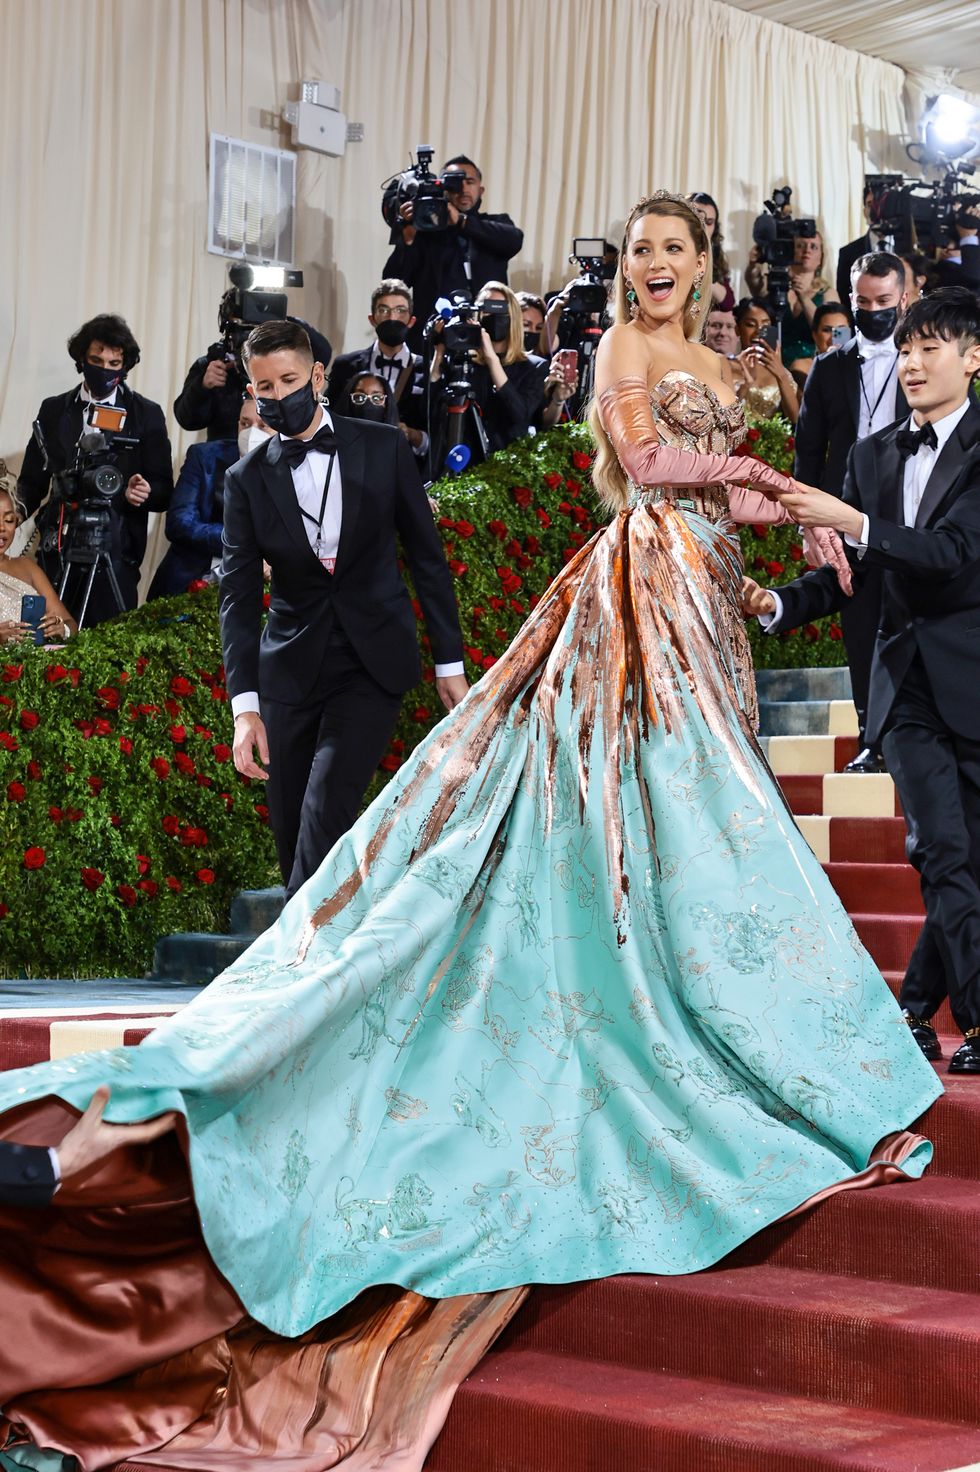 Blake Lively transforms at the Met Gala in architecture-inspired Versace  gown